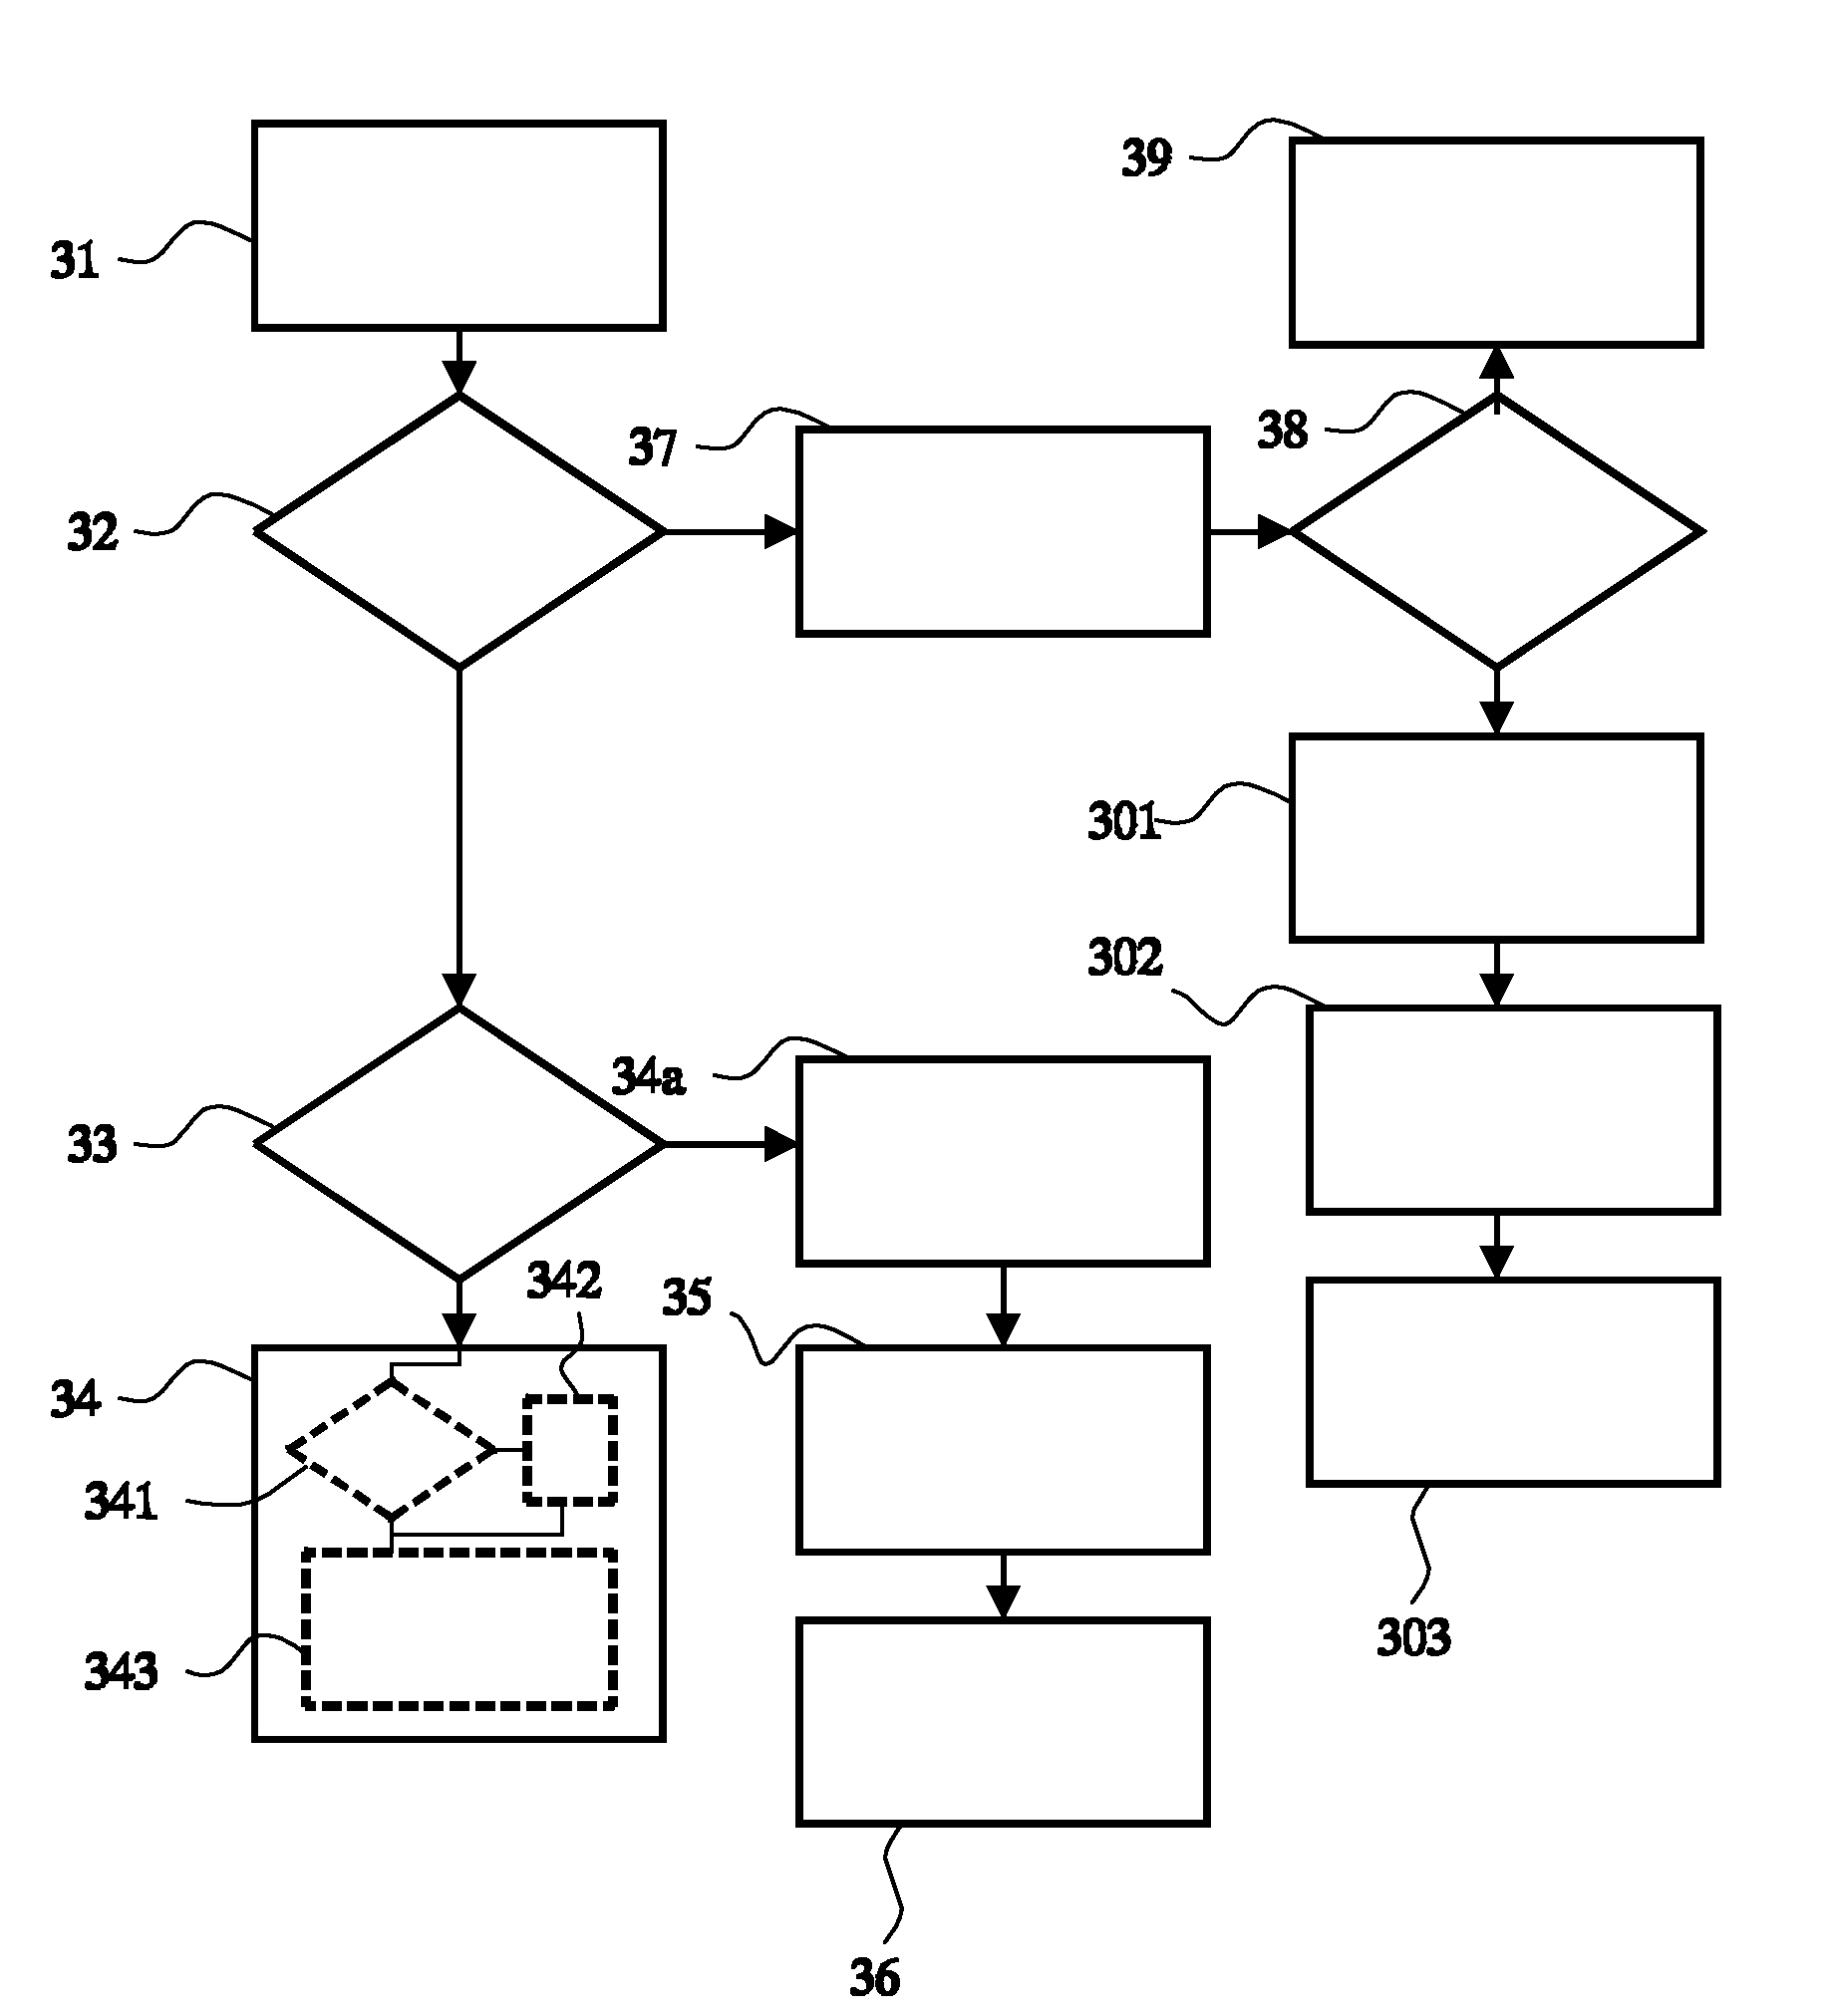 Multiprocessing circuit with cache circuits that allow writing to not previously loaded cache lines